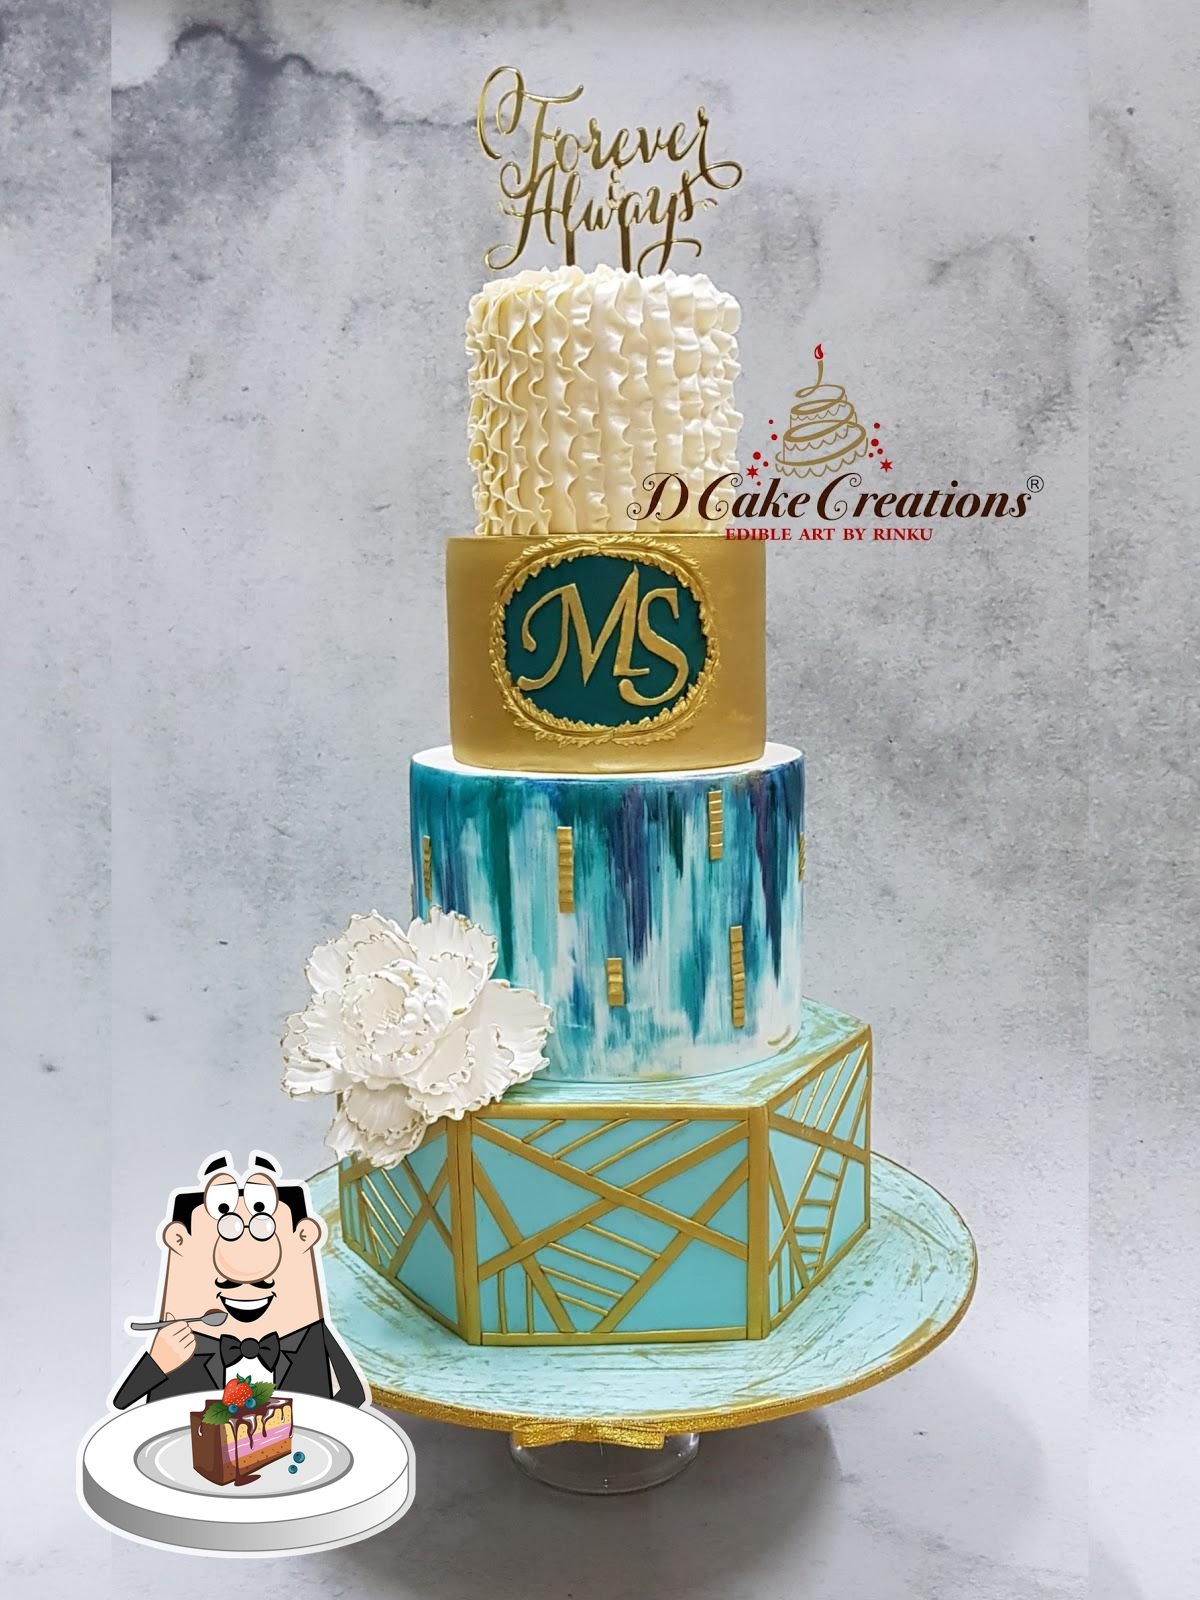 D Cake Creations updated their cover photo. - D Cake Creations